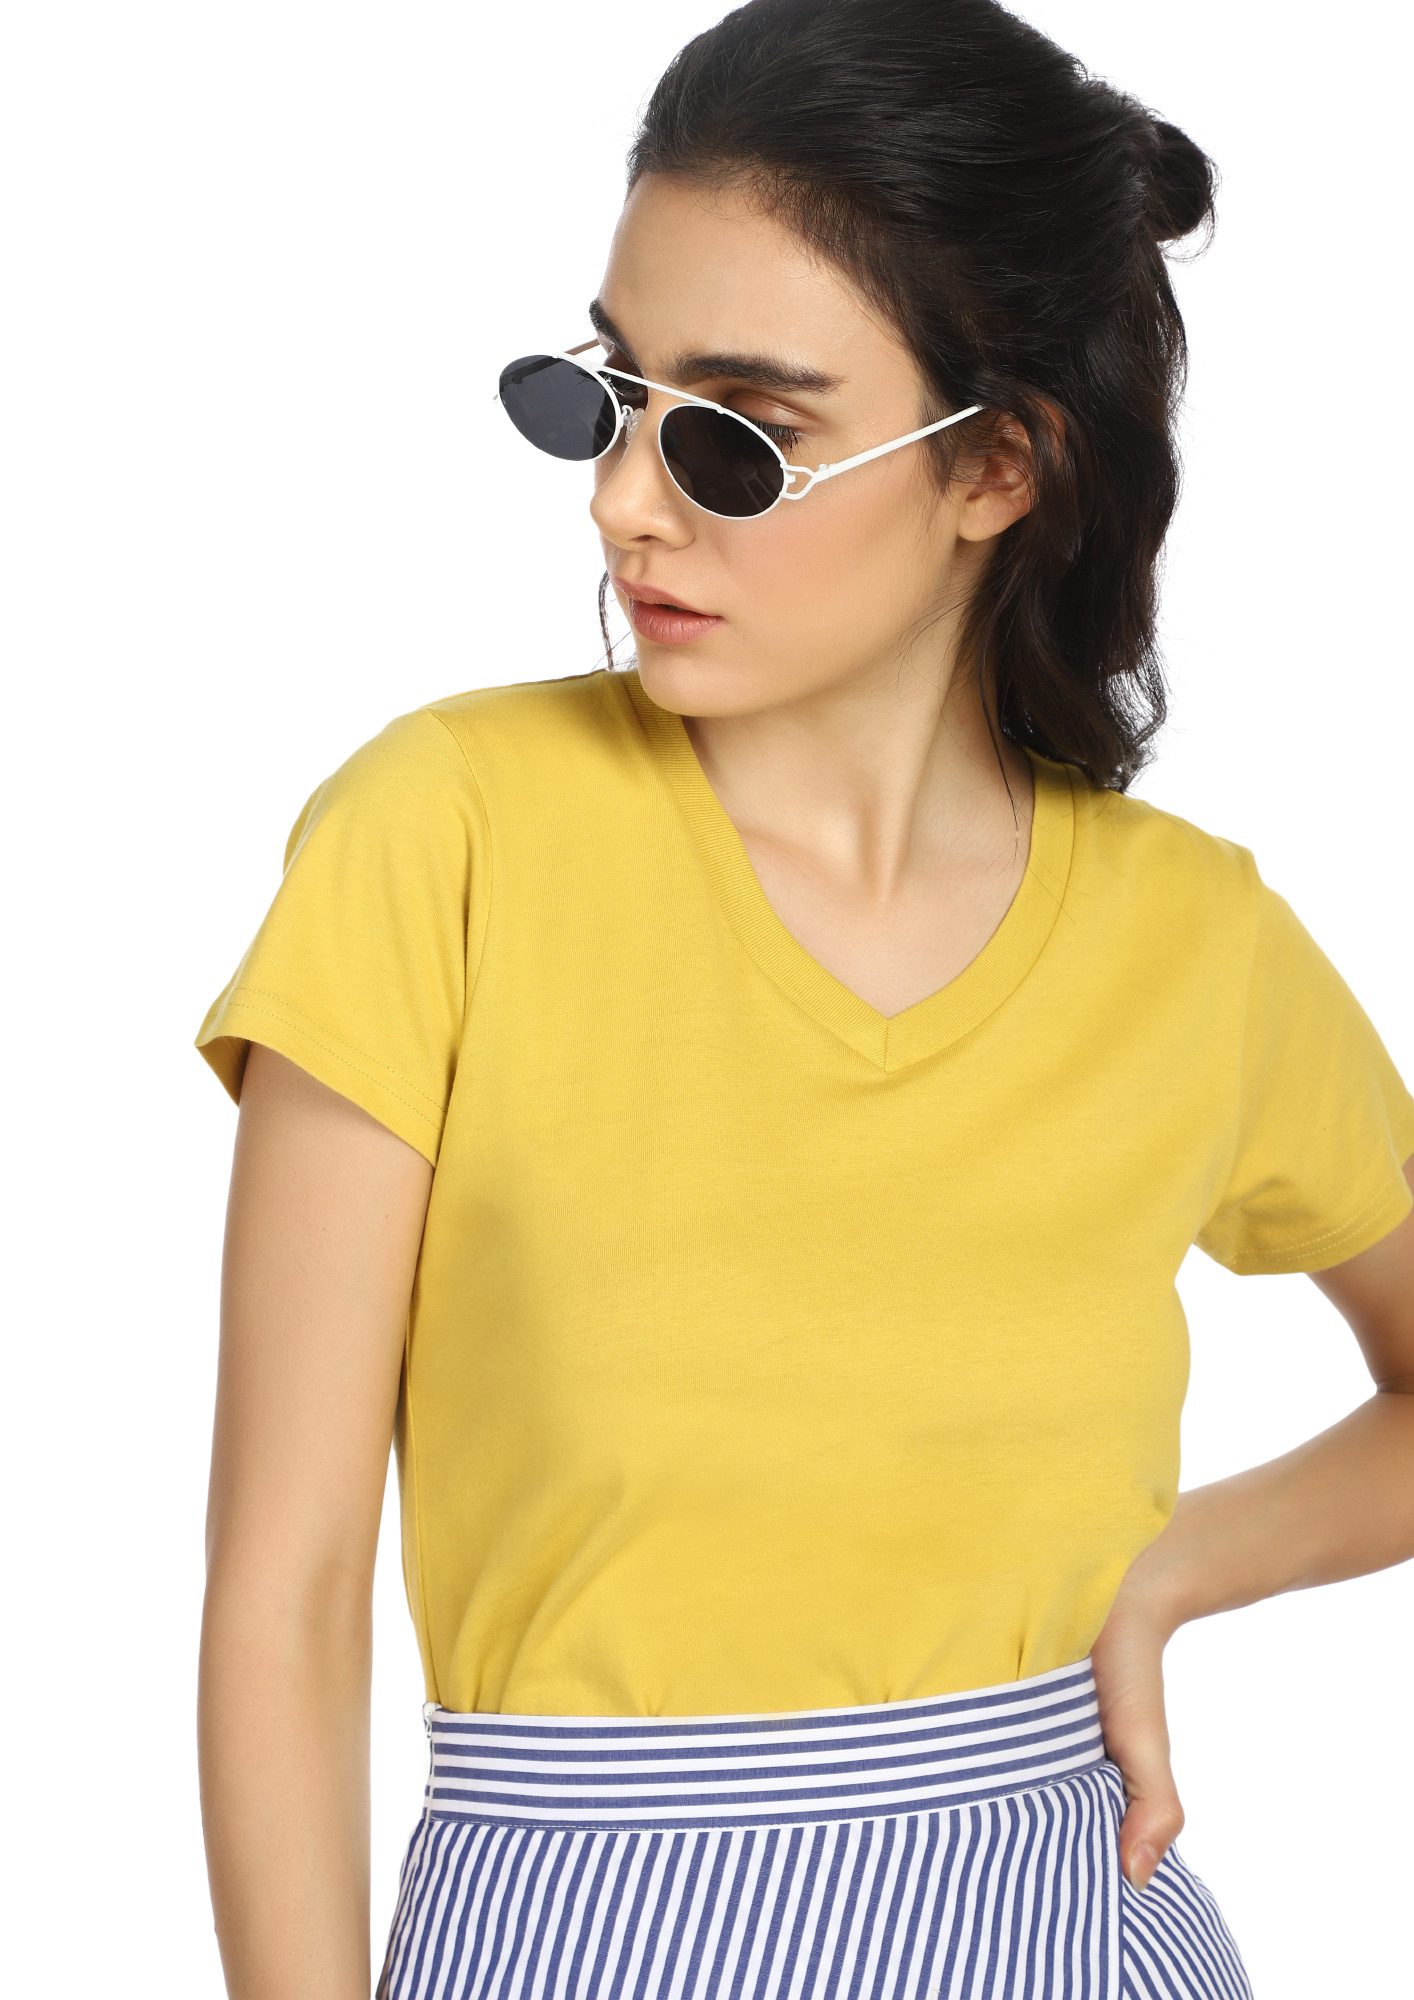 CASUAL STREET STYLE YELLOW T-SHIRT